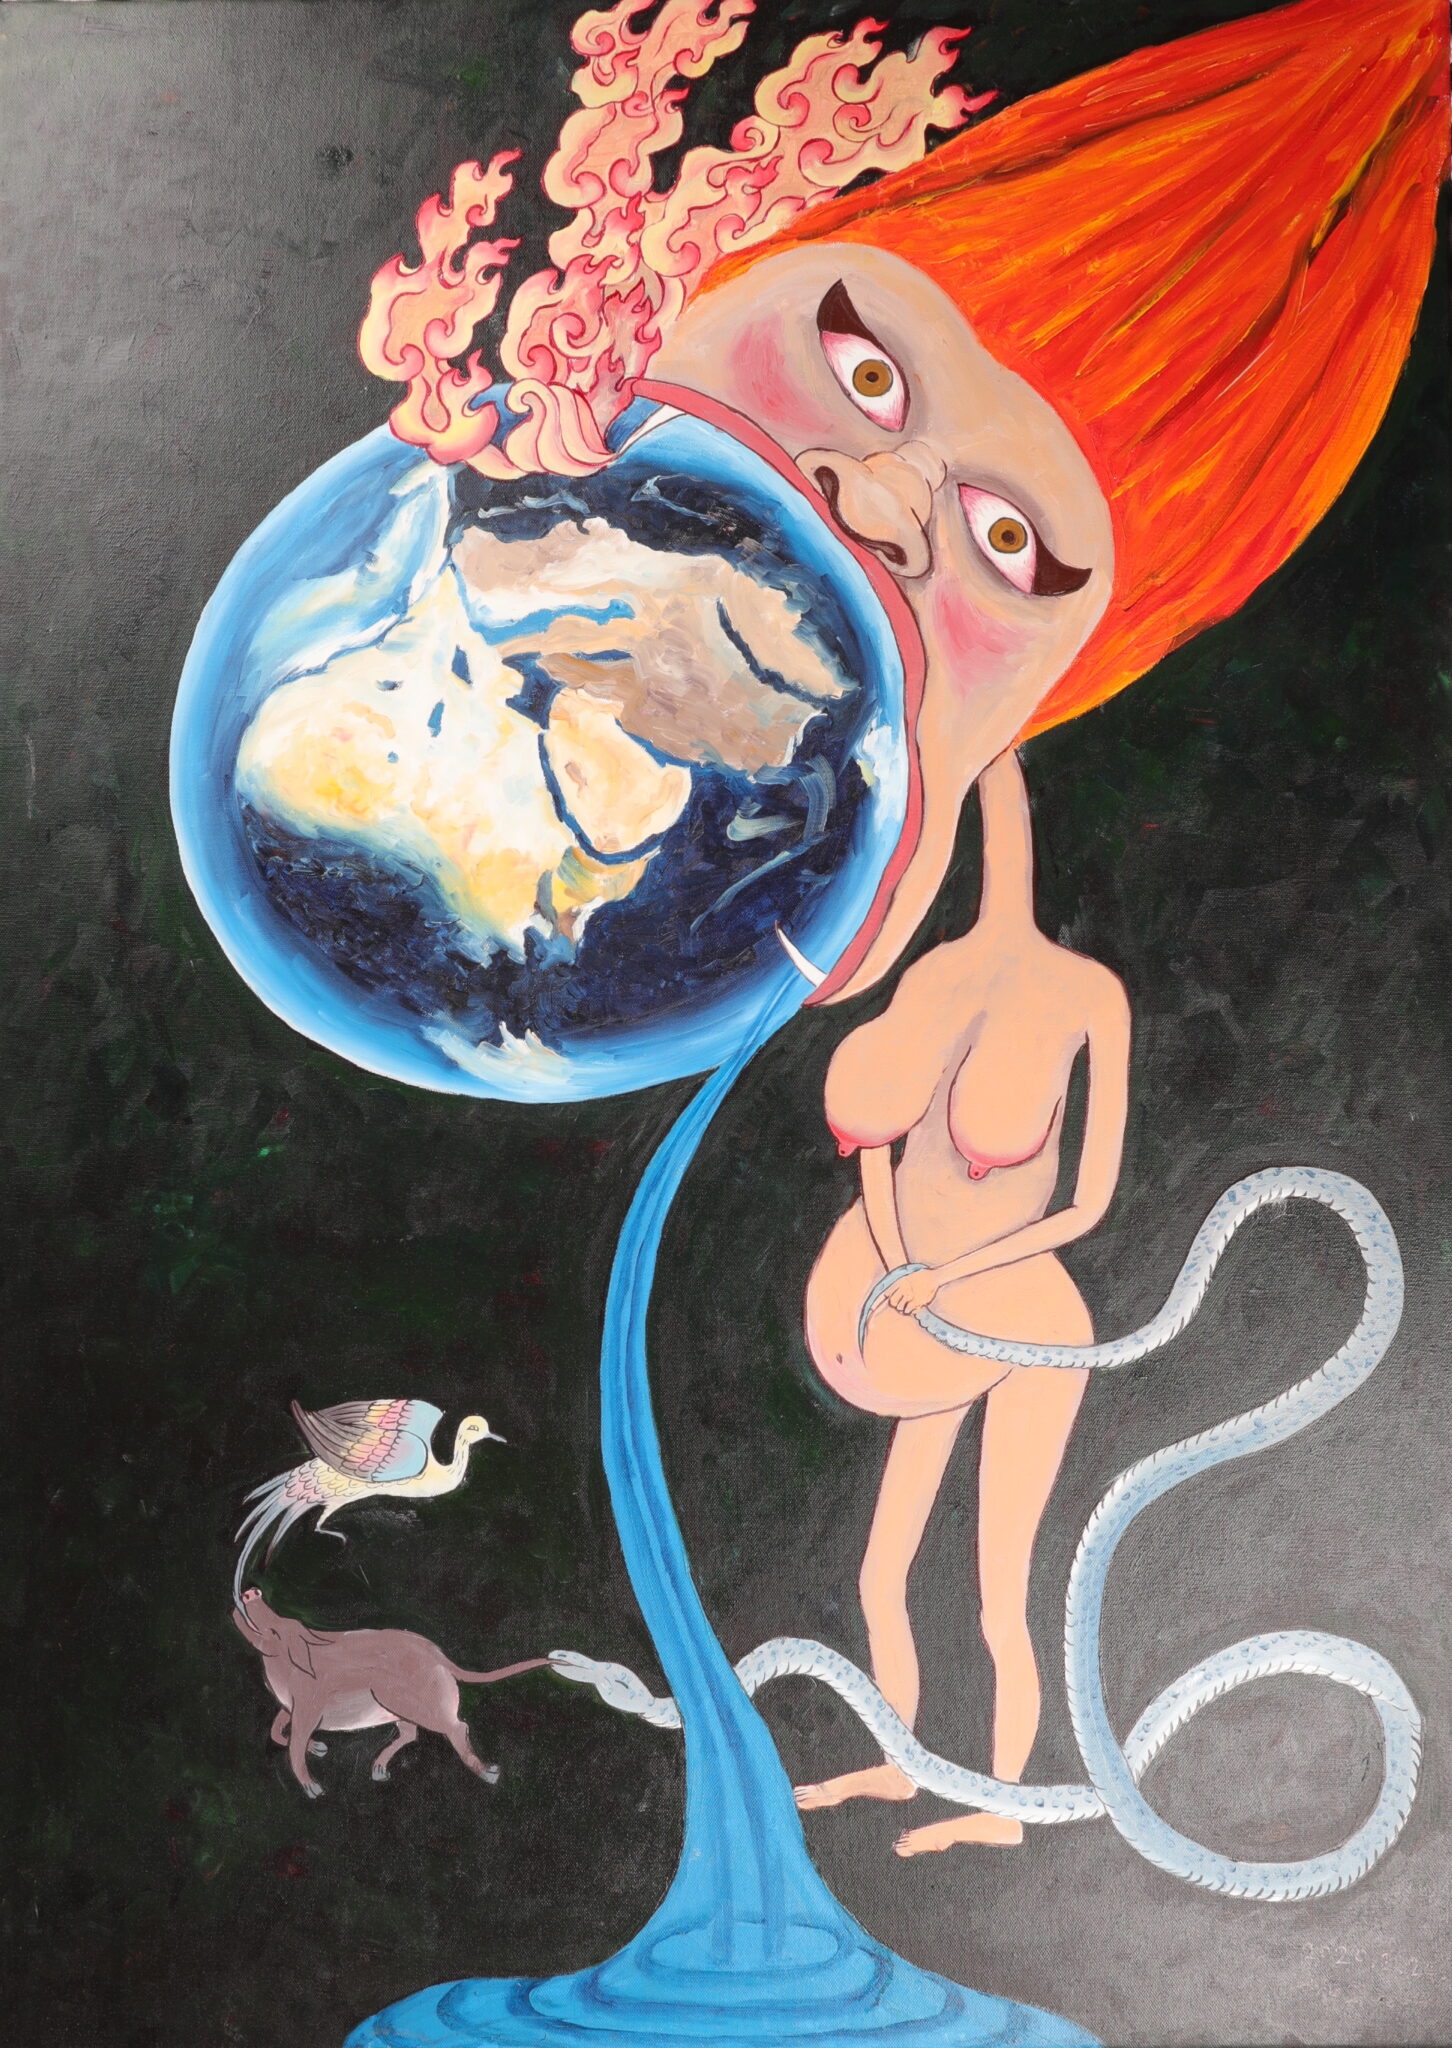 Stylized female figure holding planet Earth, beset by flame and flood, in mouth as snake emerges from her pregnant belly